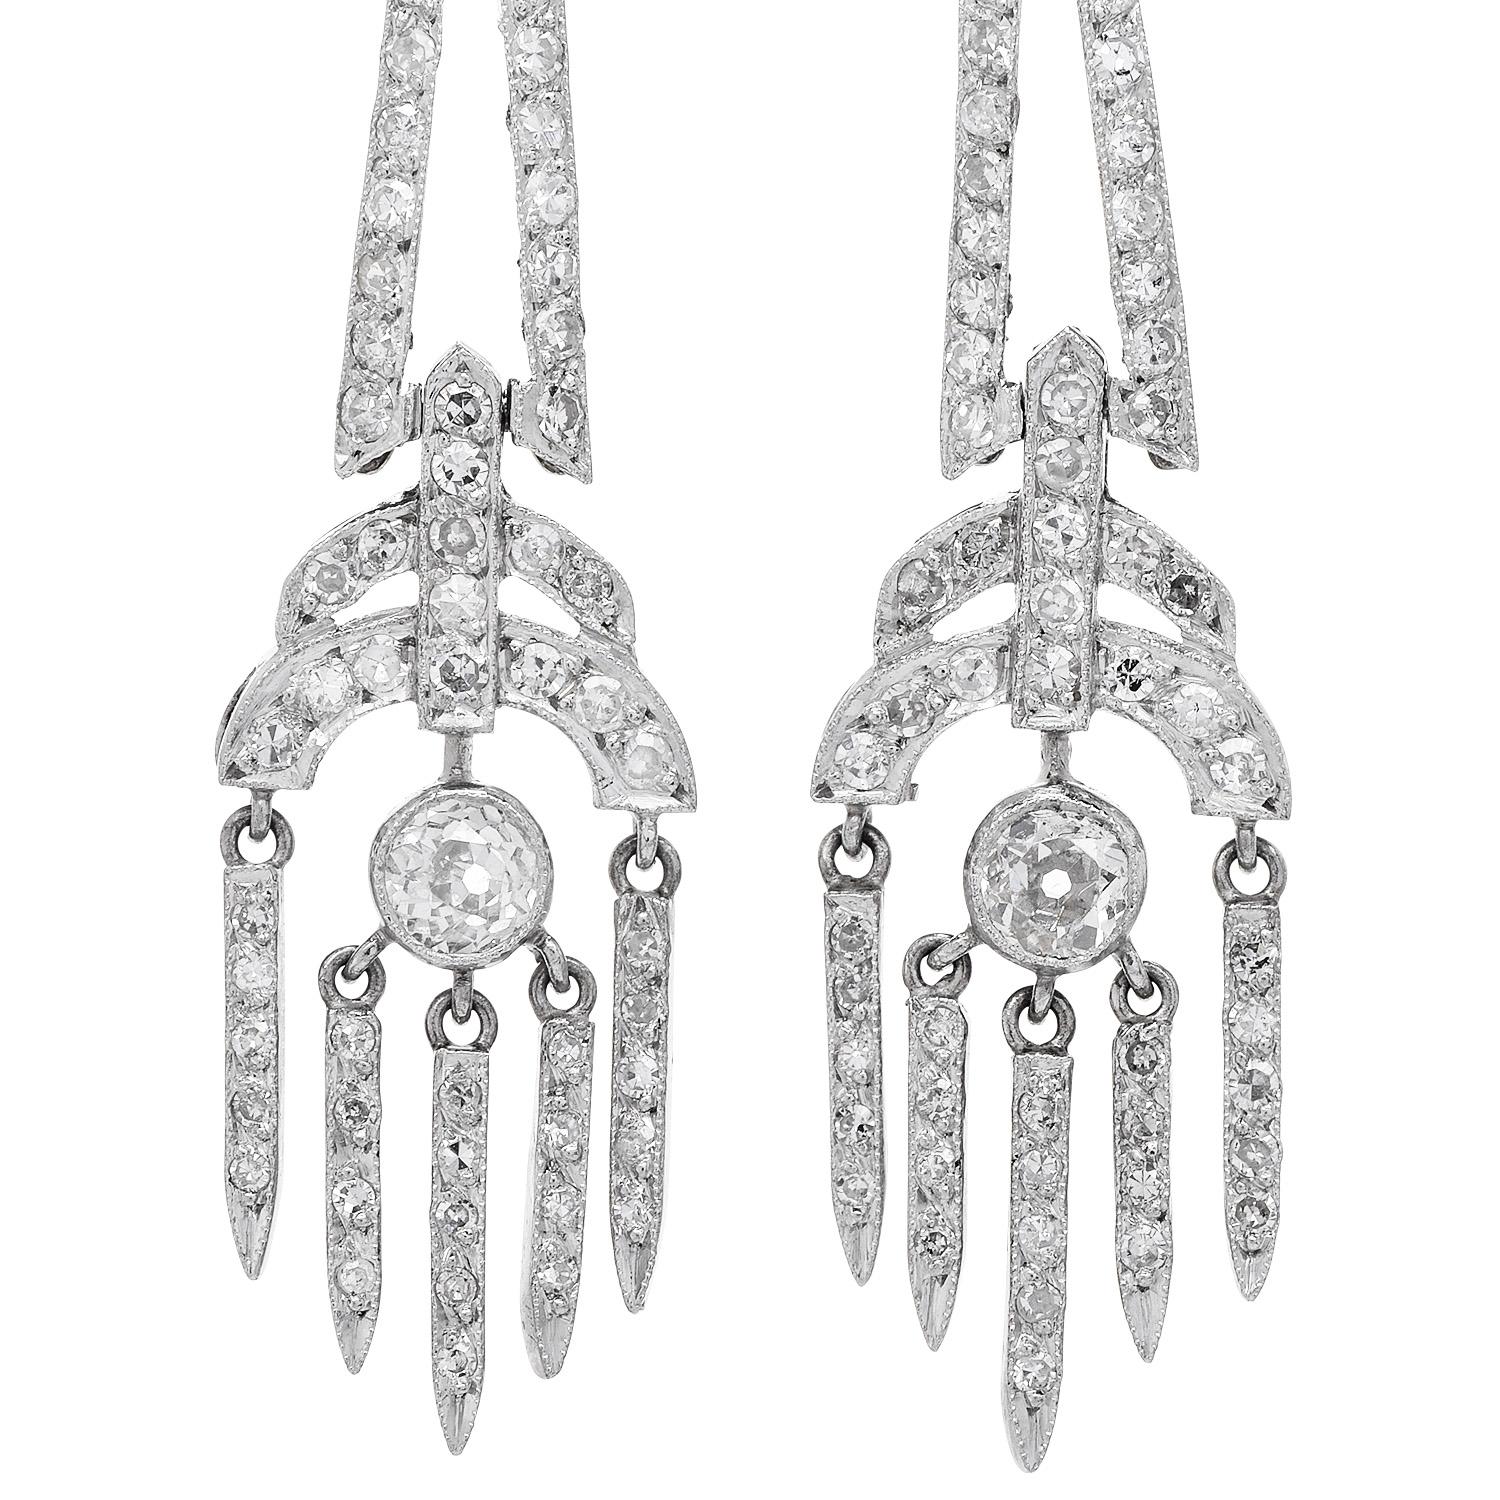  These irresistible platinum chandelier earrings are no ordinary design! with a mistic eye inspired design, this true vintage piece has movement and life,  Each earring features a center Old Cut diamond suspending five dangling links, with approx.